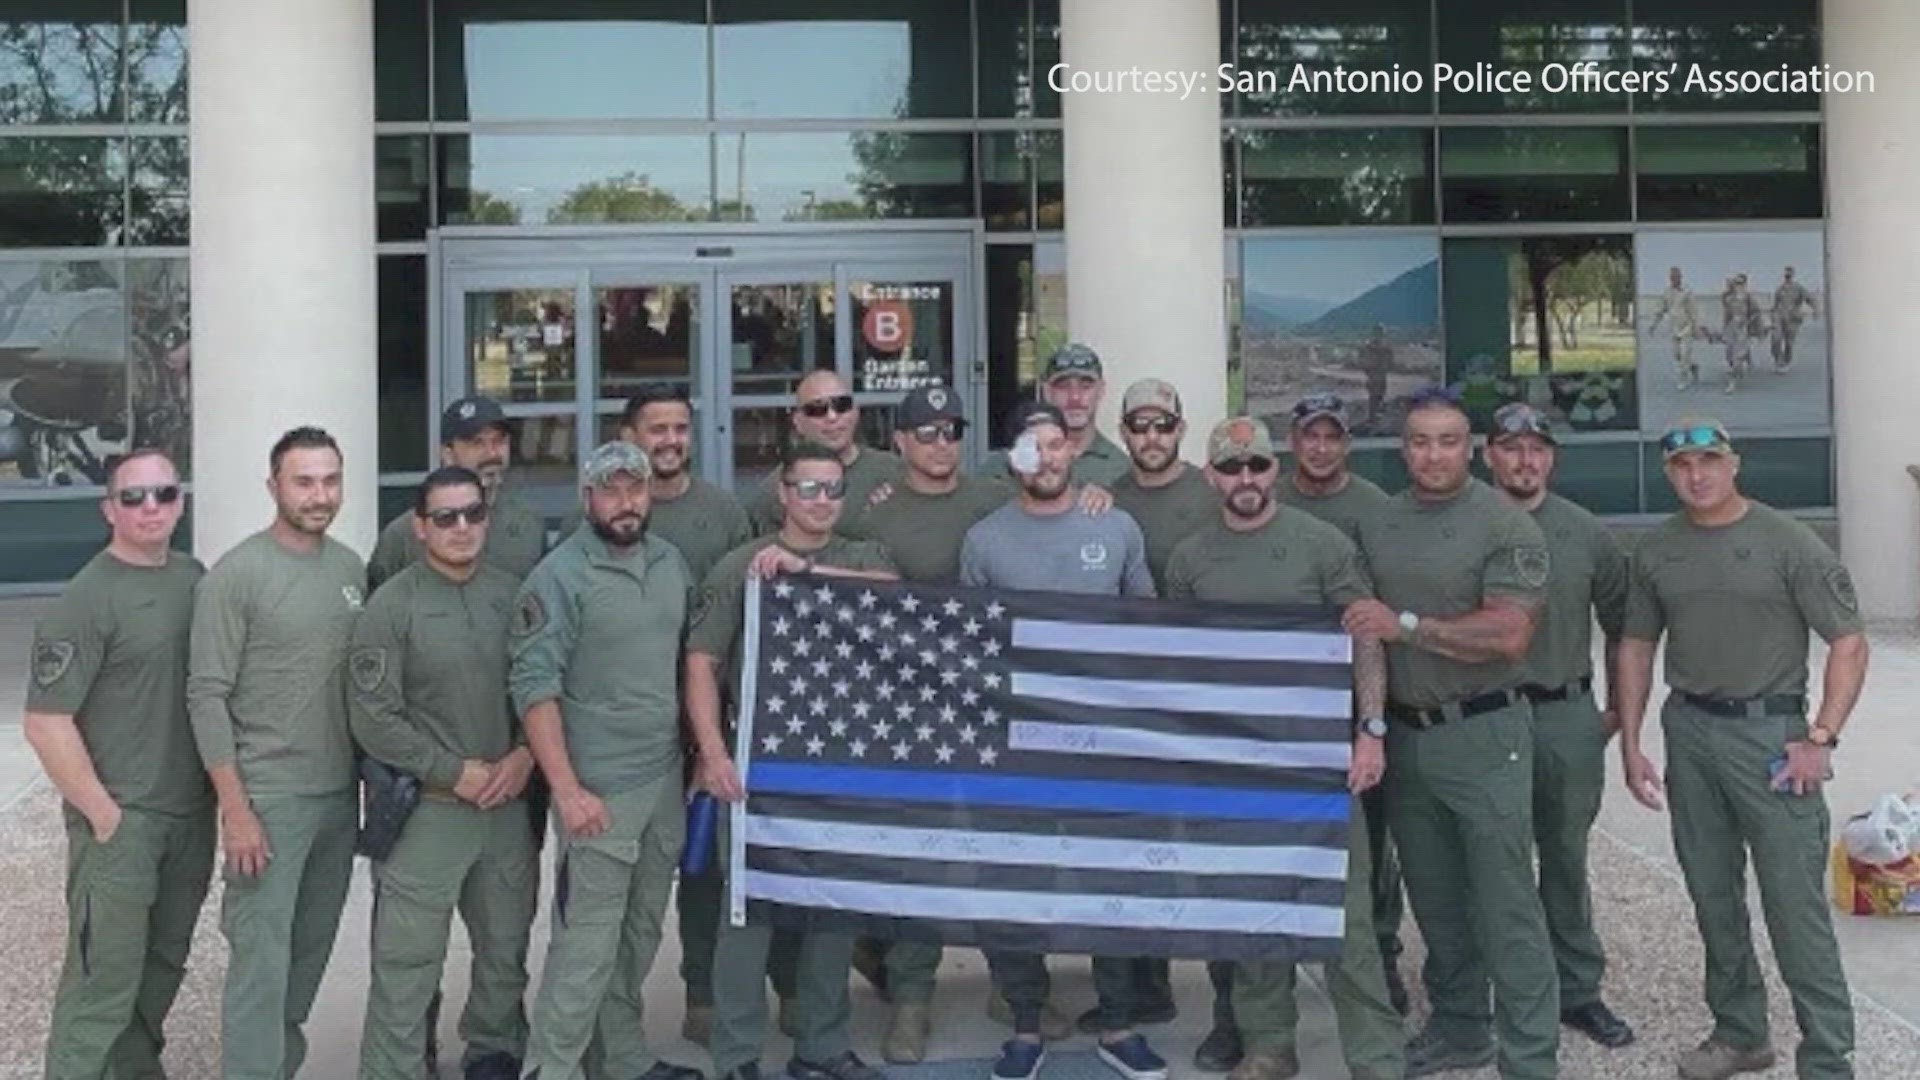 The San Antonio Police Department on Tuesday morning identified the injured officers as Rhett Shoquist and Raul Chavez.